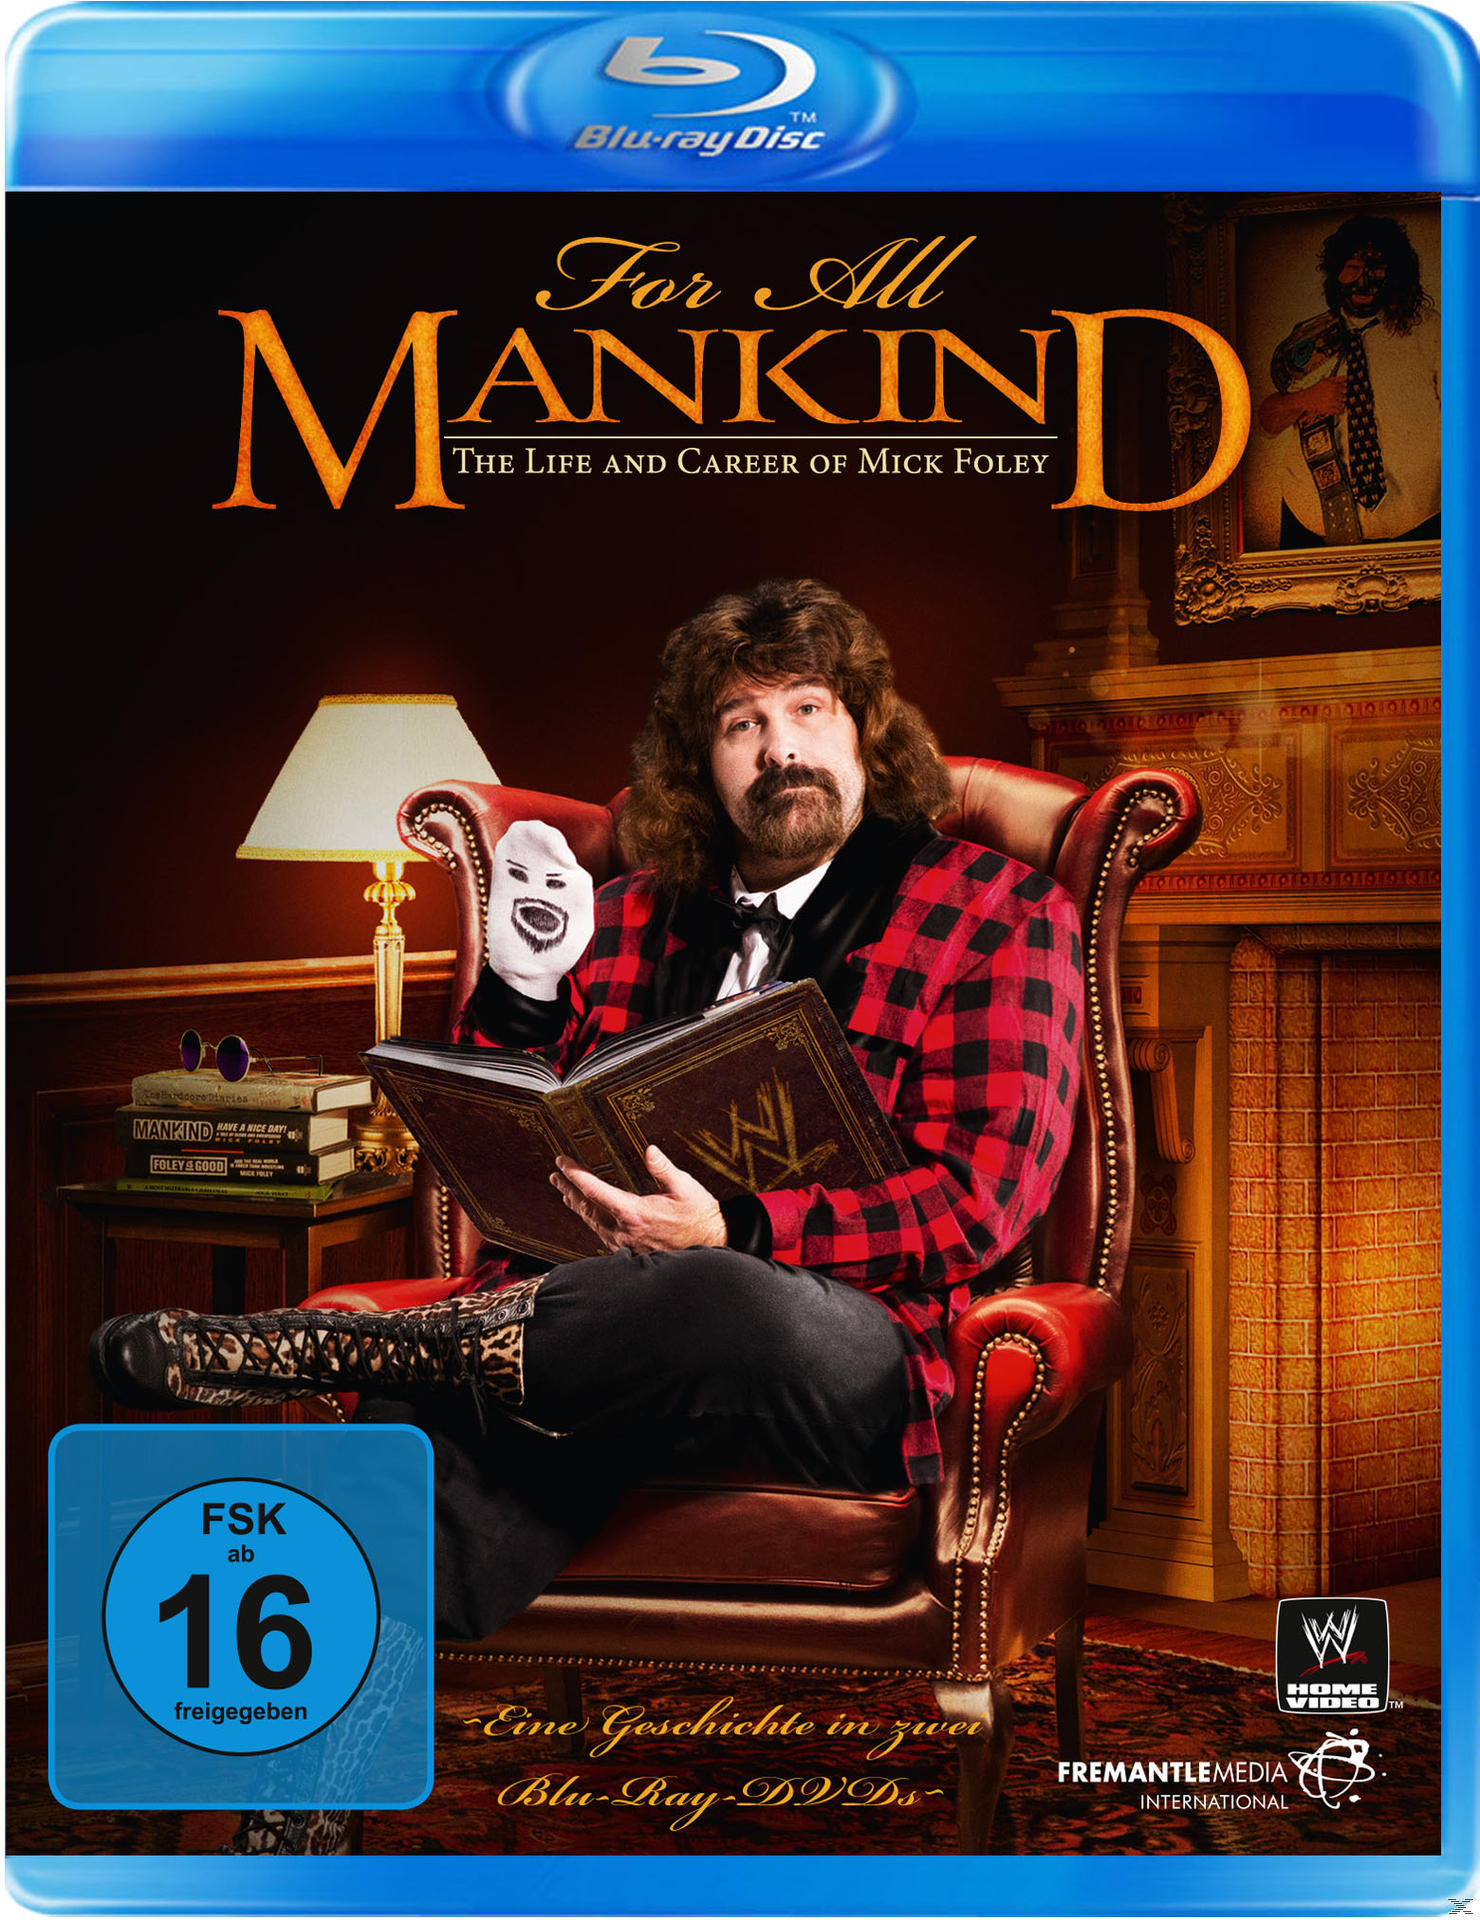 For all mankind: The life Blu-ray Foley & career of Mick